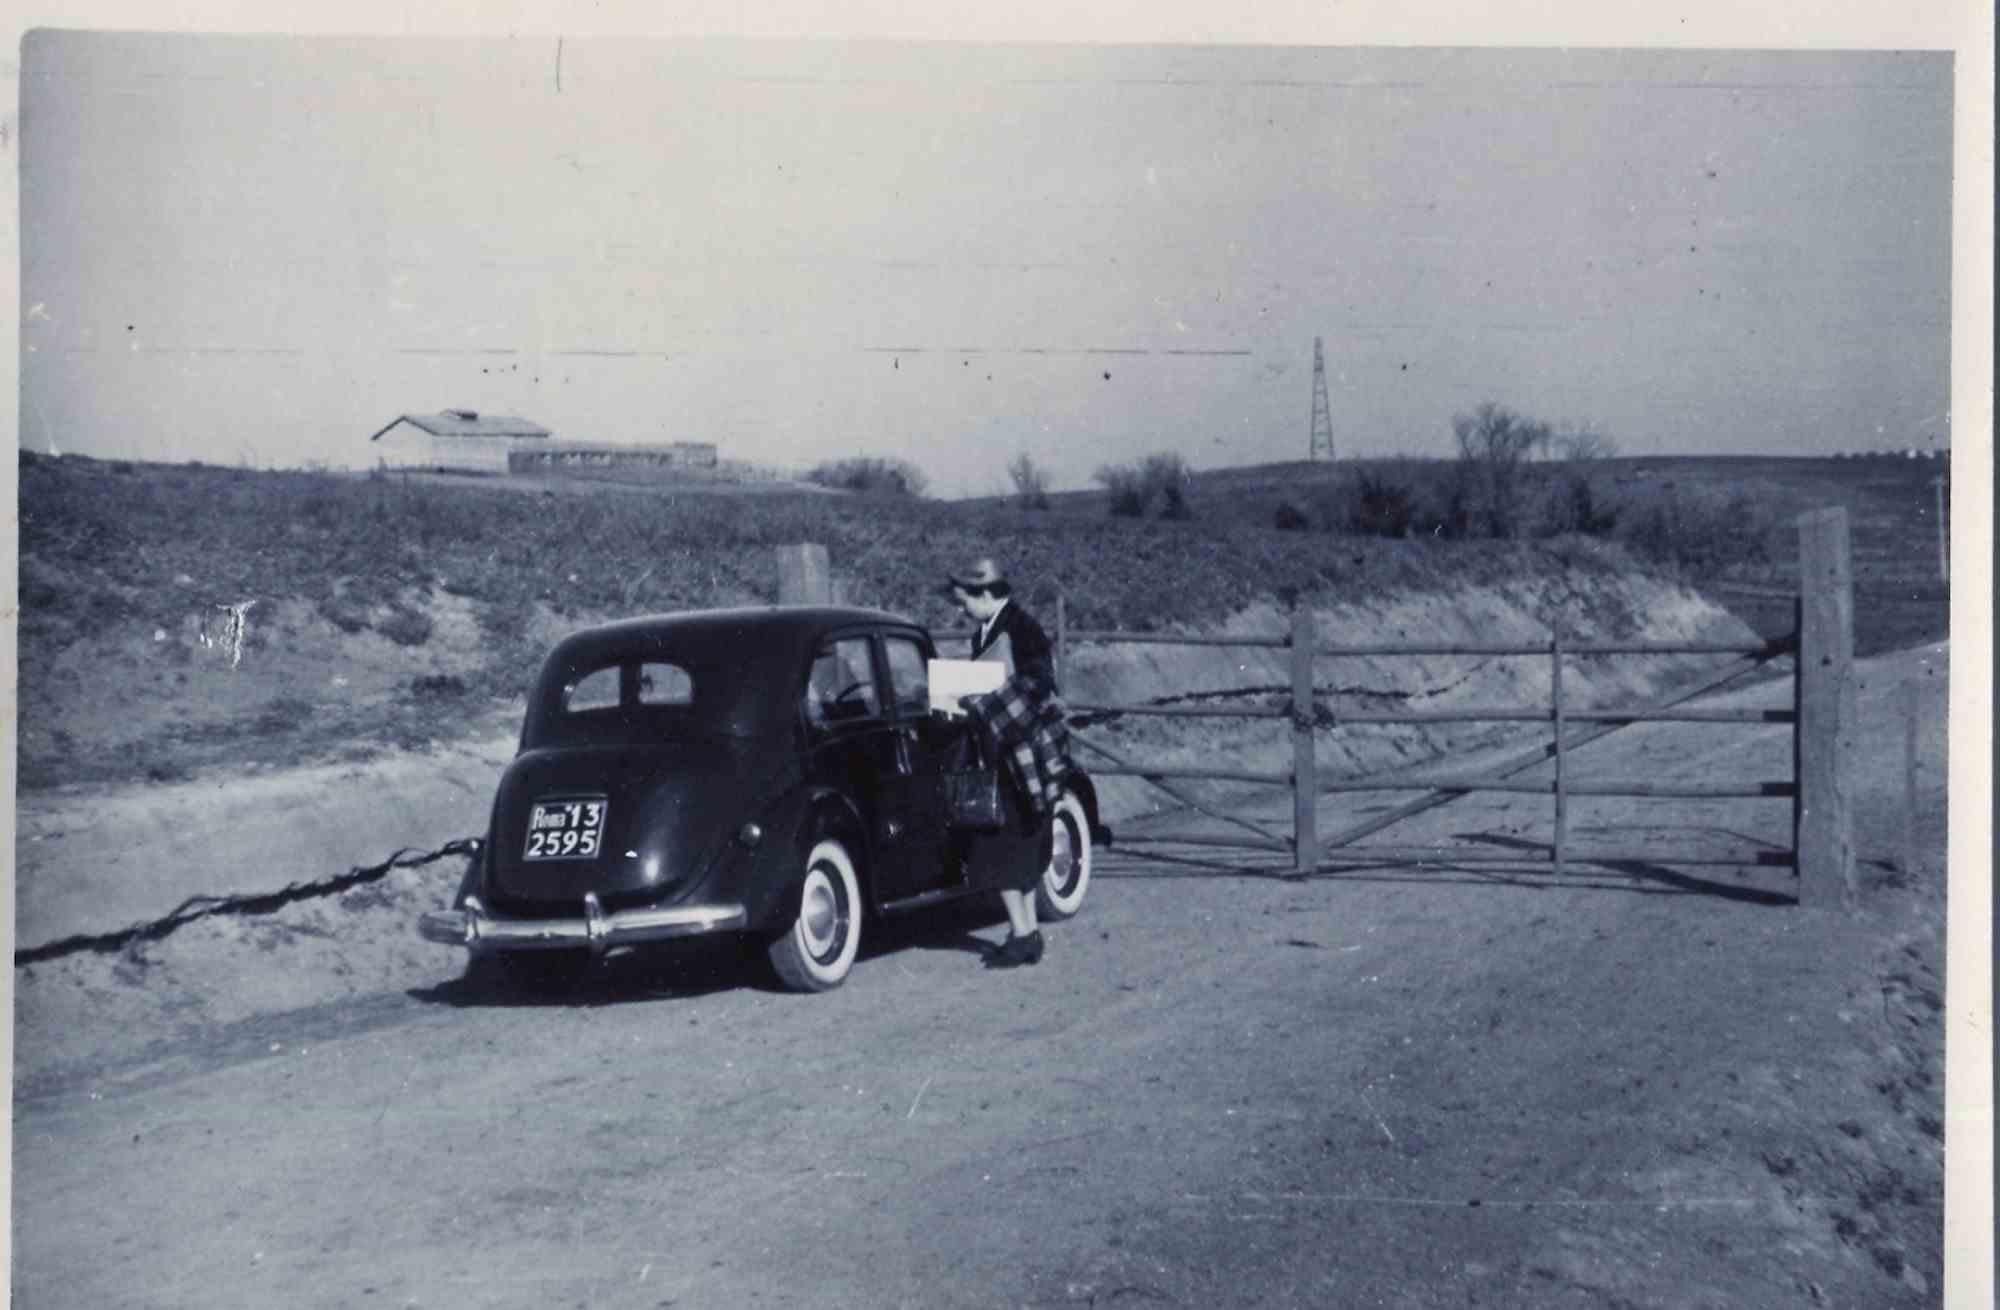 Unknown Landscape Photograph - Old Days Photo - Old Car - Vintage Photo - Mid-20th Century